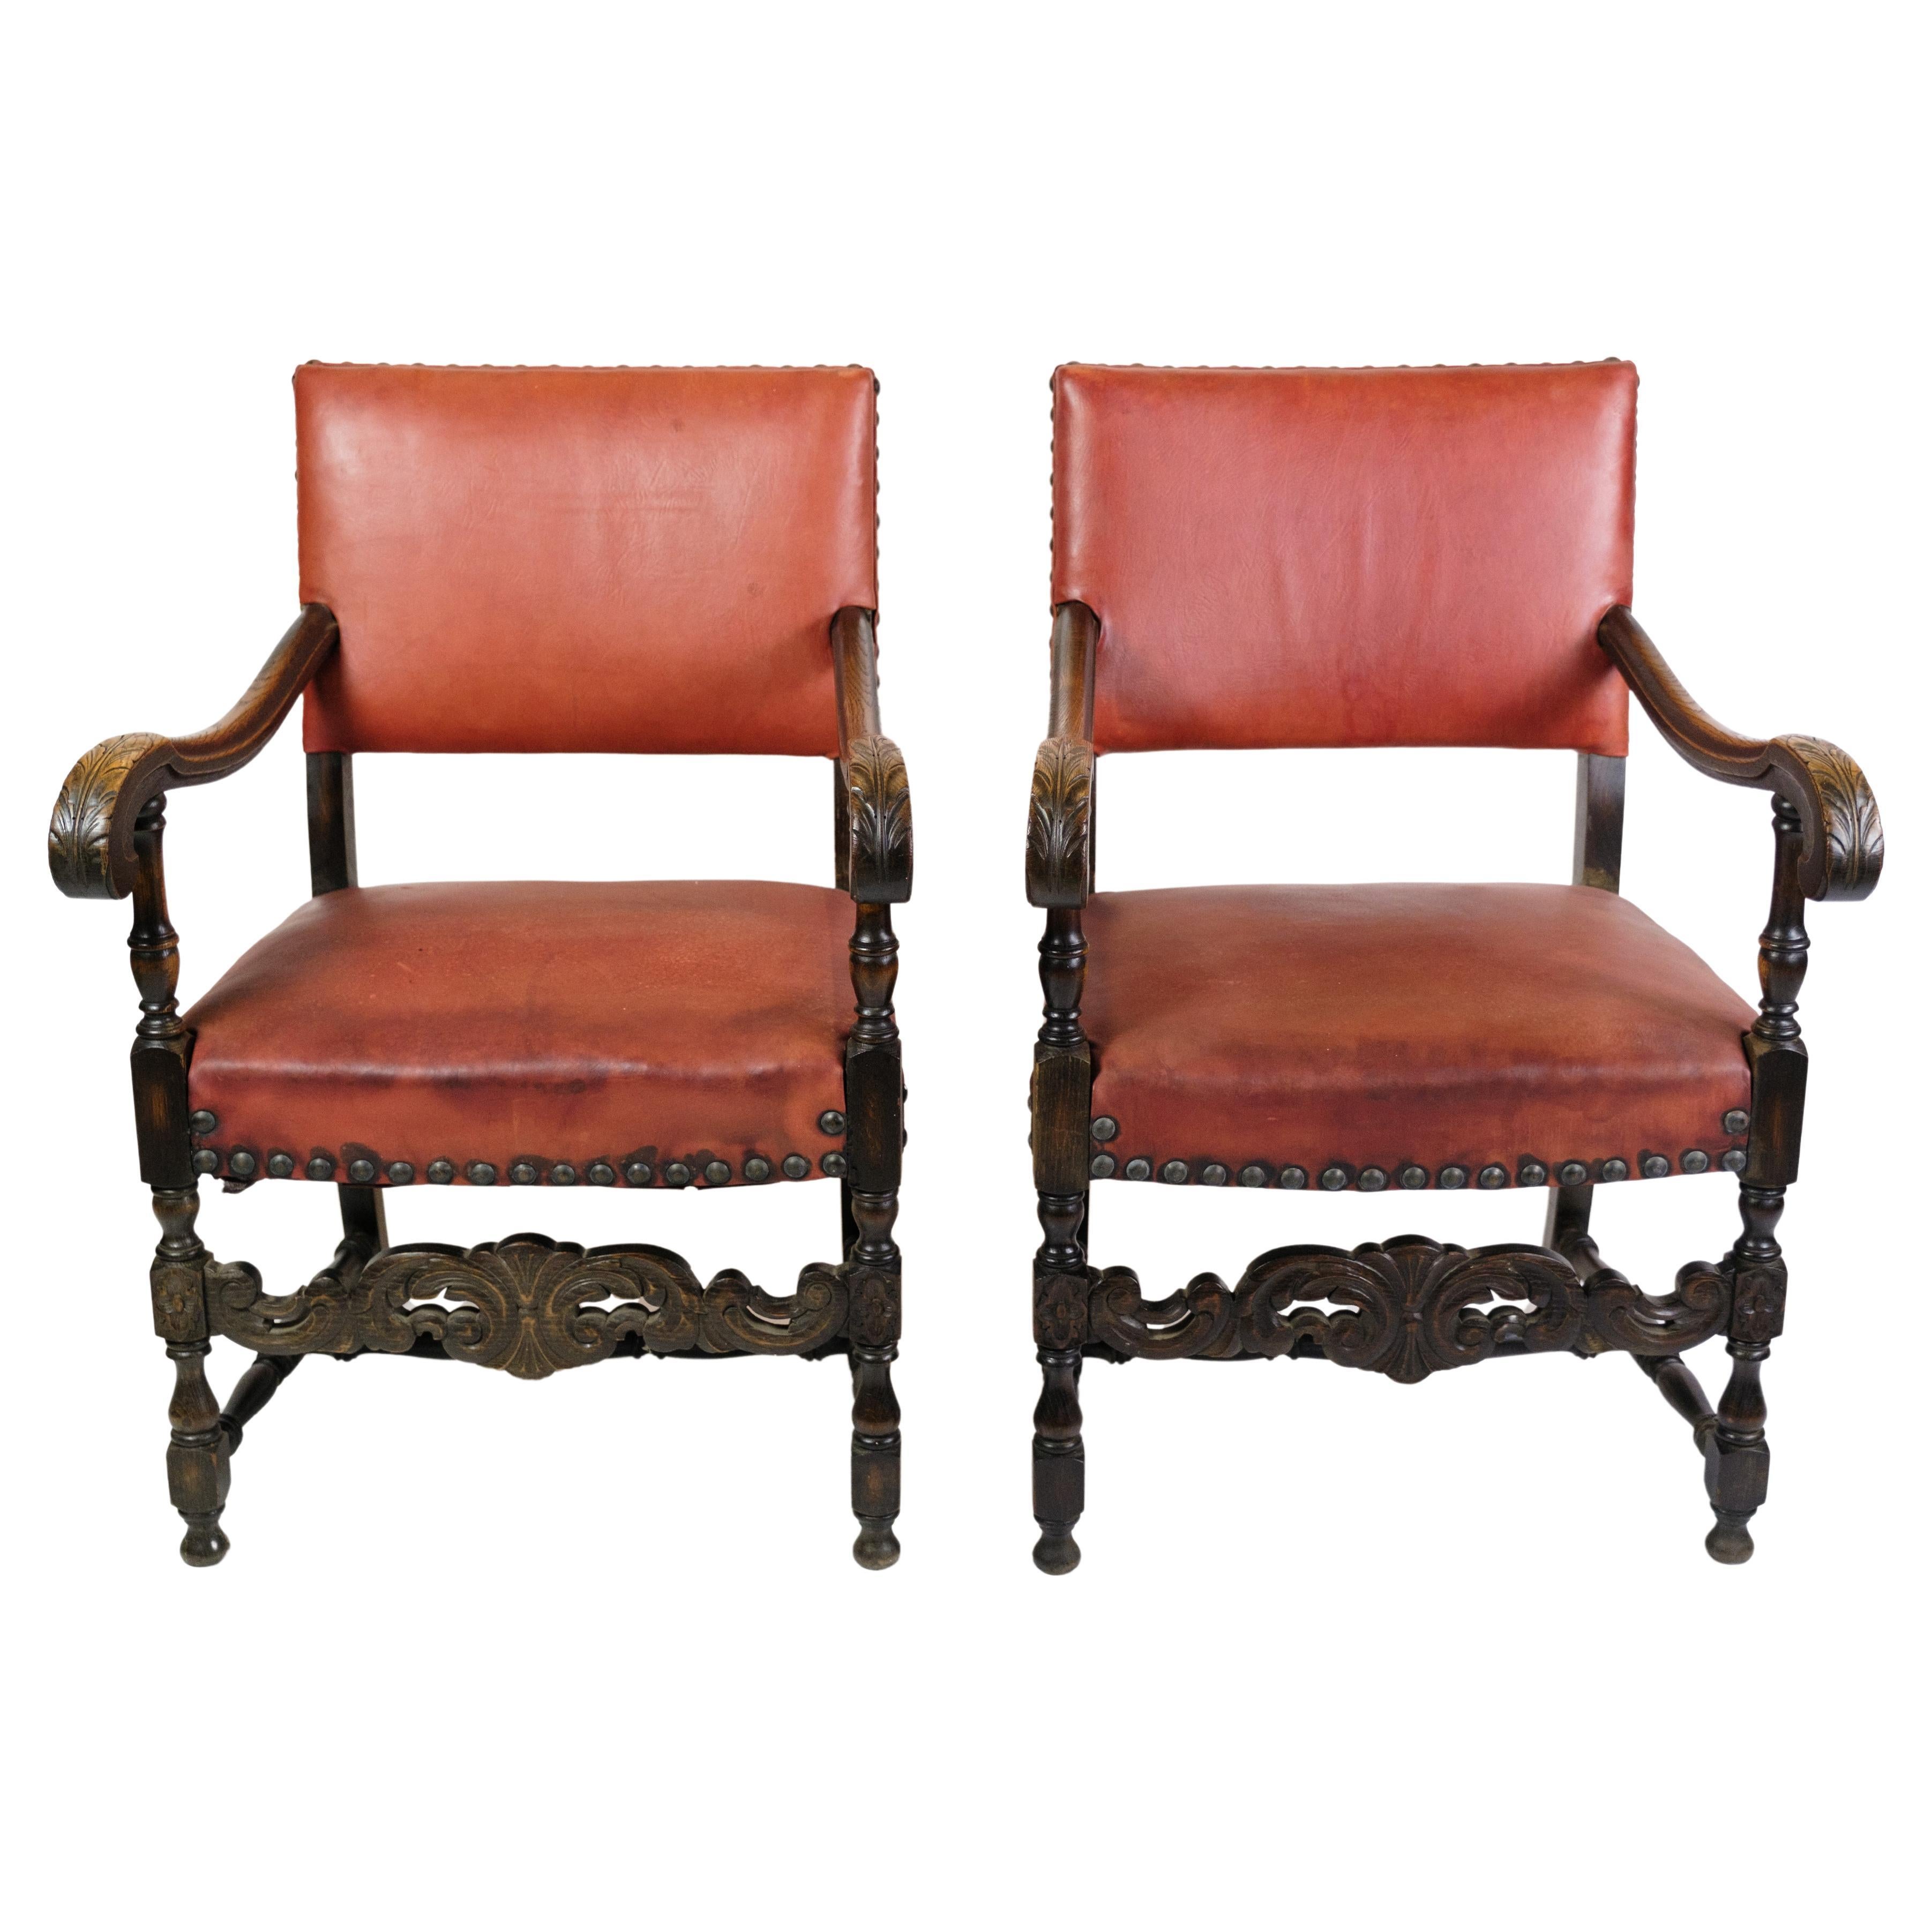 Set Of 2 Antique Armchairs Made In Oak & With Red Leather From 1930s For Sale